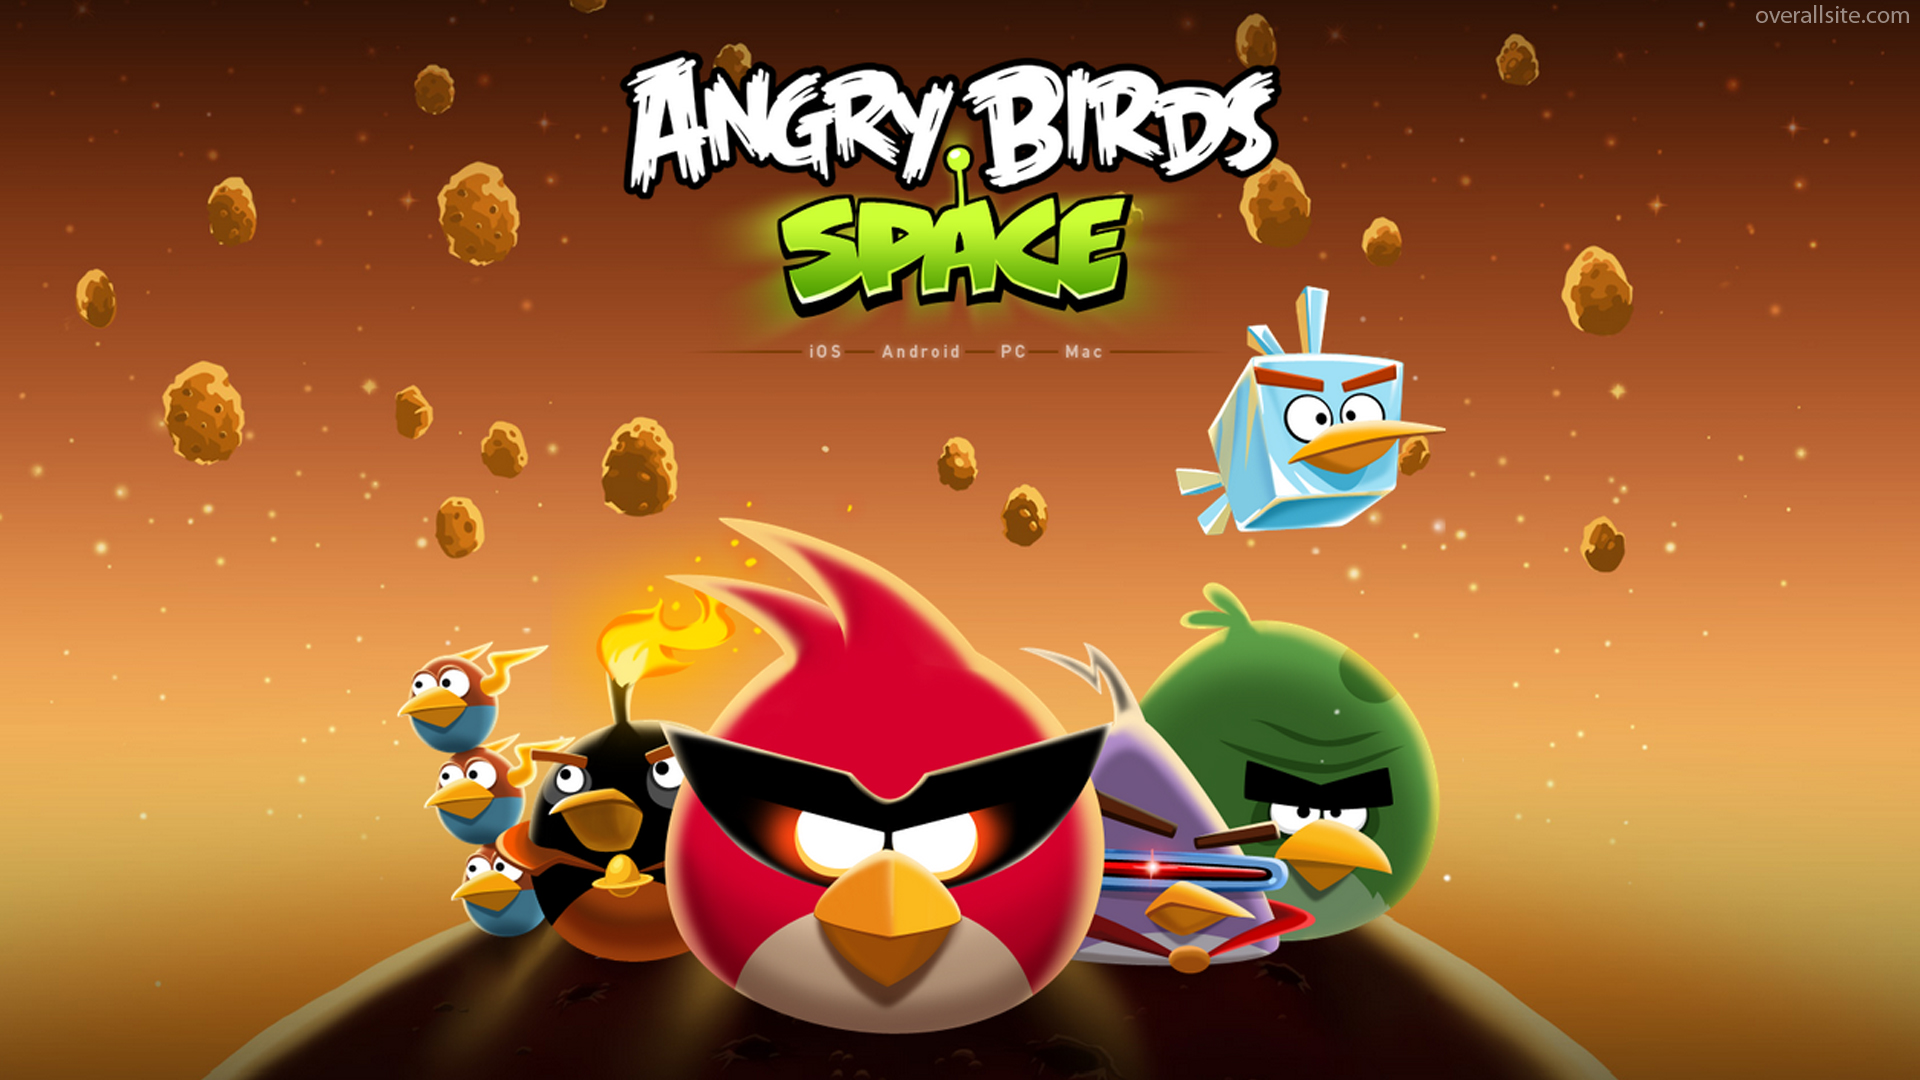 Mobile Angry Birds Space More Overallsite Wallpaper | HD ...